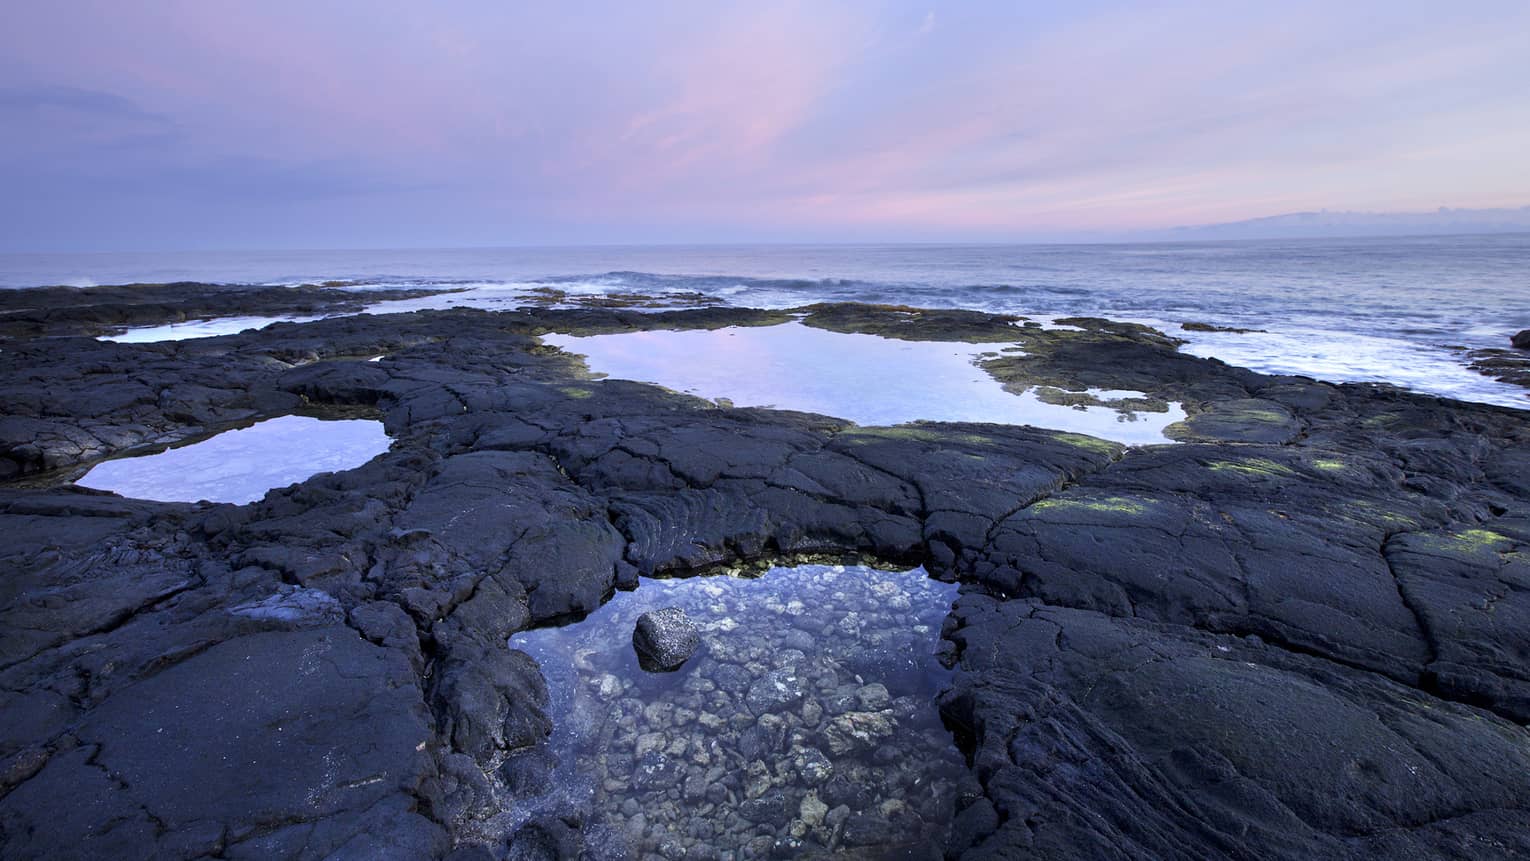 Pools of water on the Hualalai beach near sunset